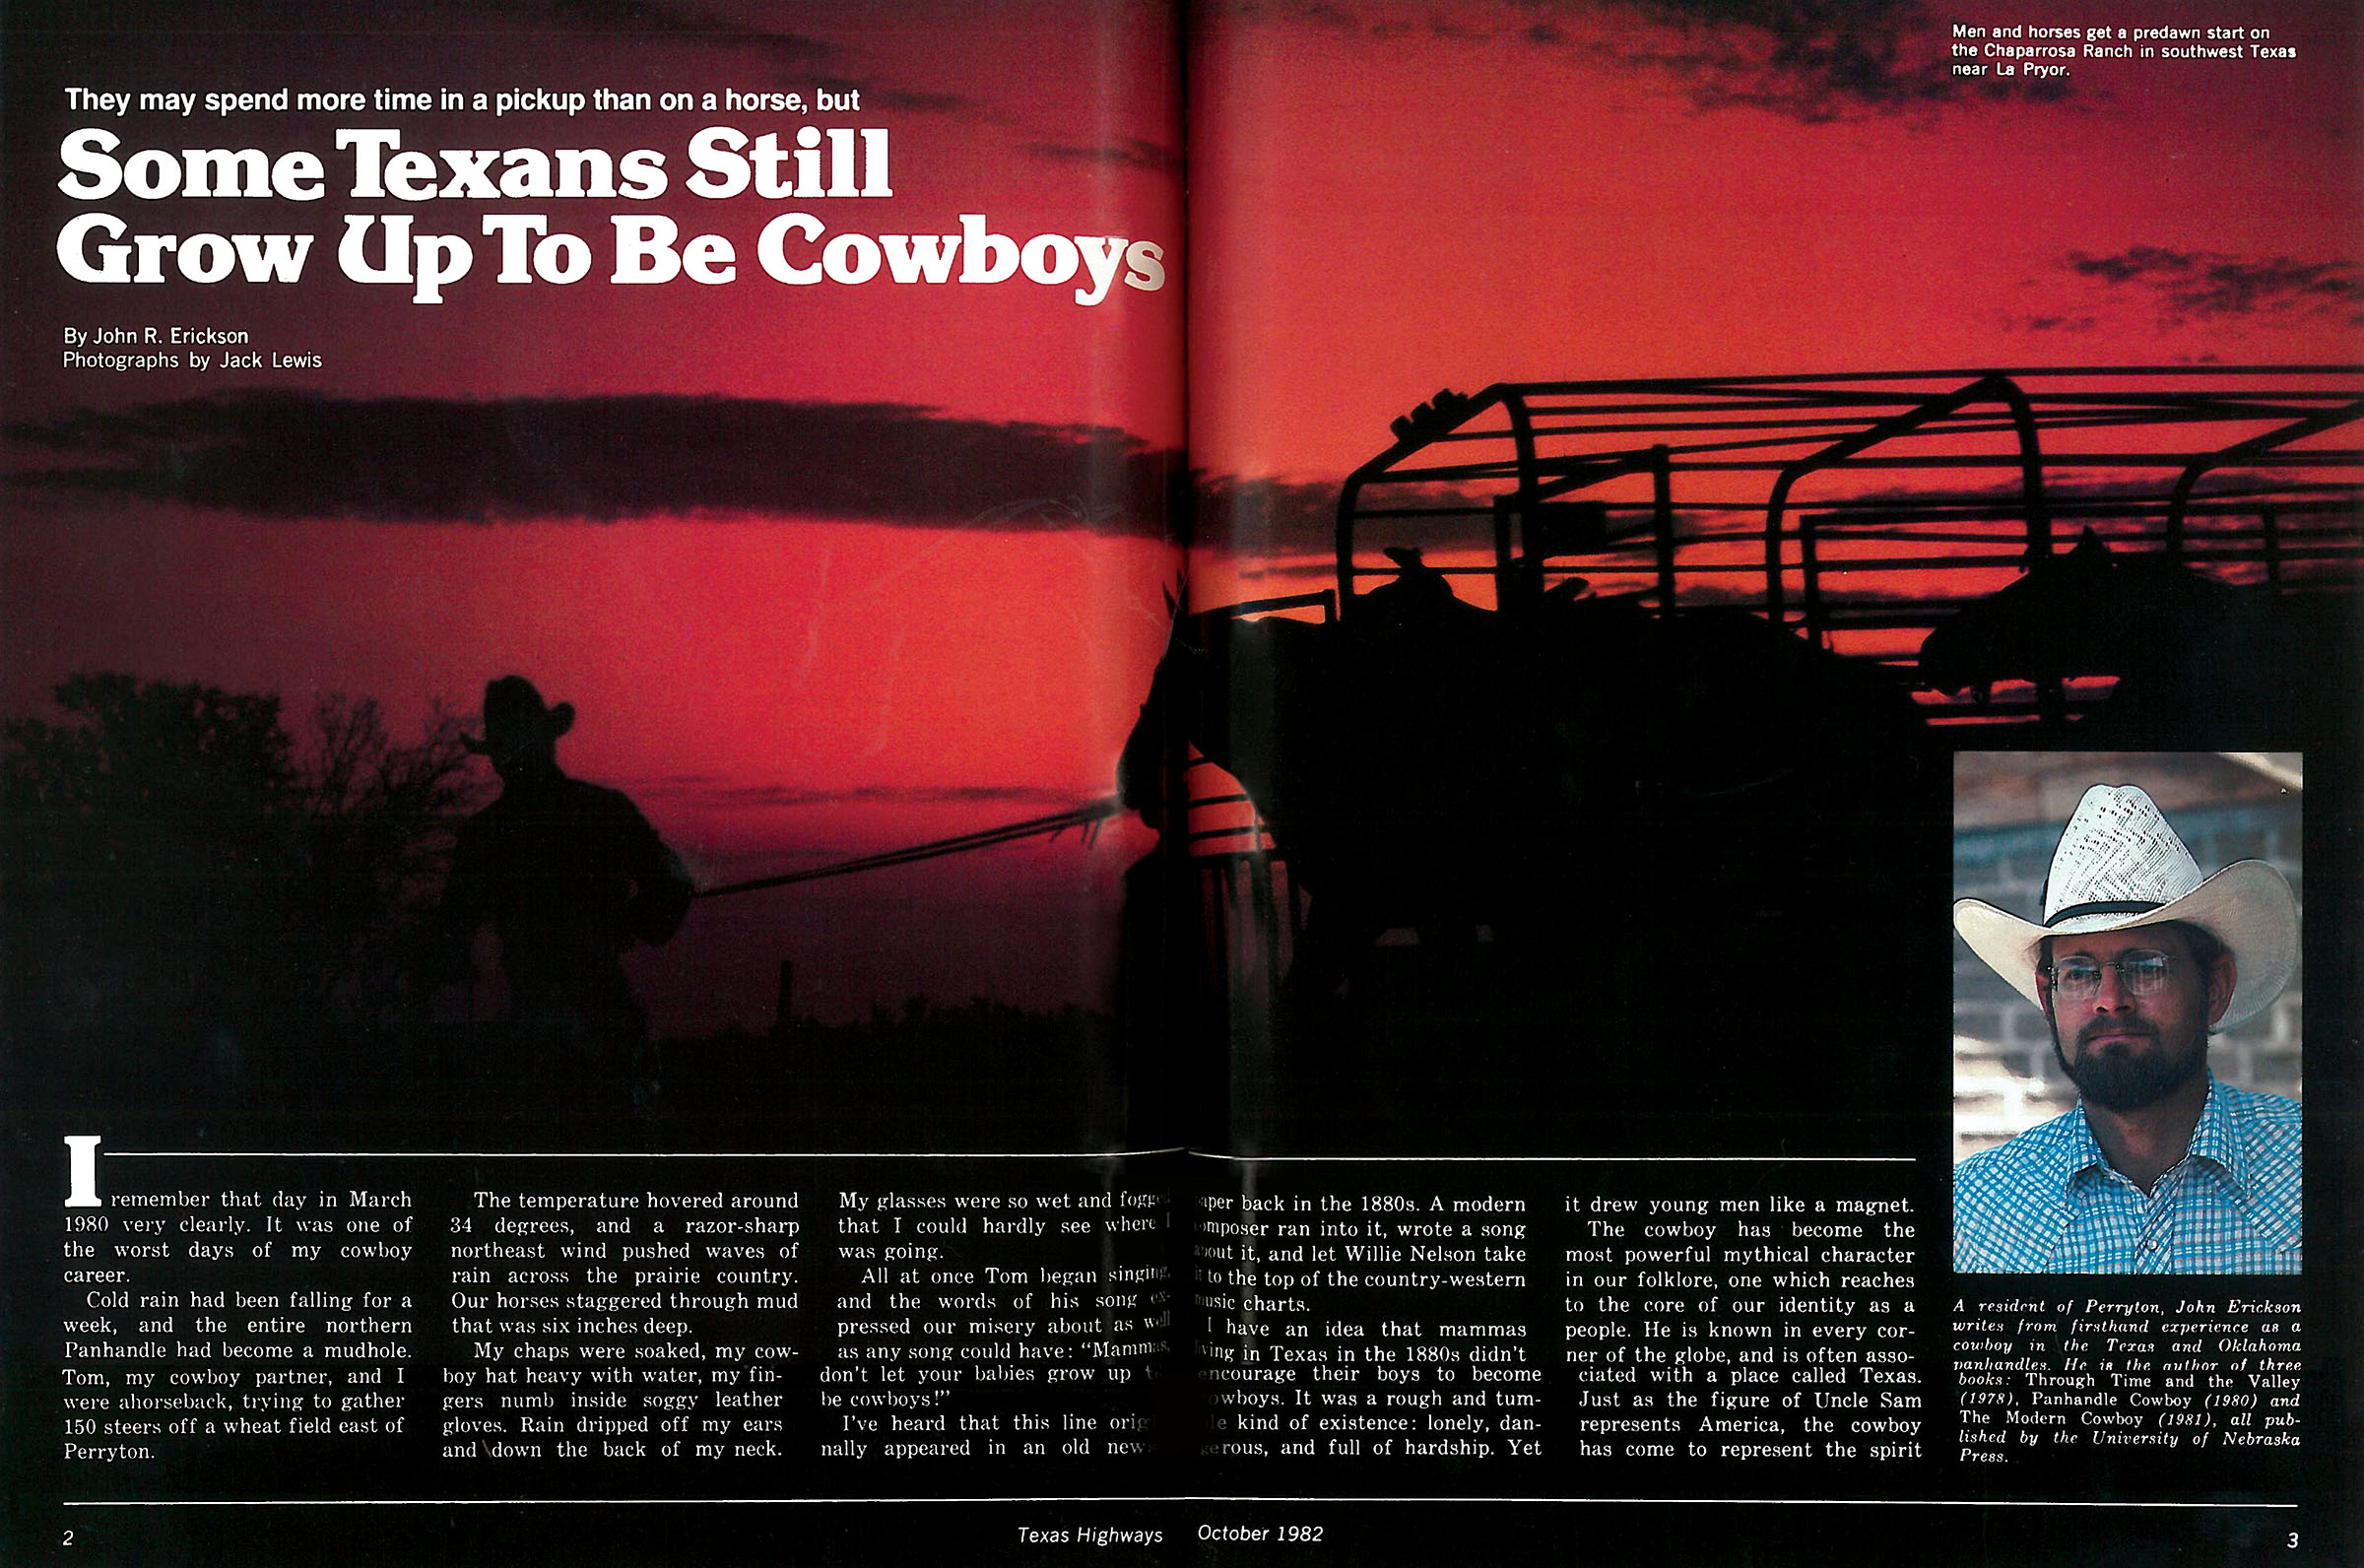 A scanned magazine spread with the headline "Some Texans Still Grow Up to be Cowboys" written by John Erickson